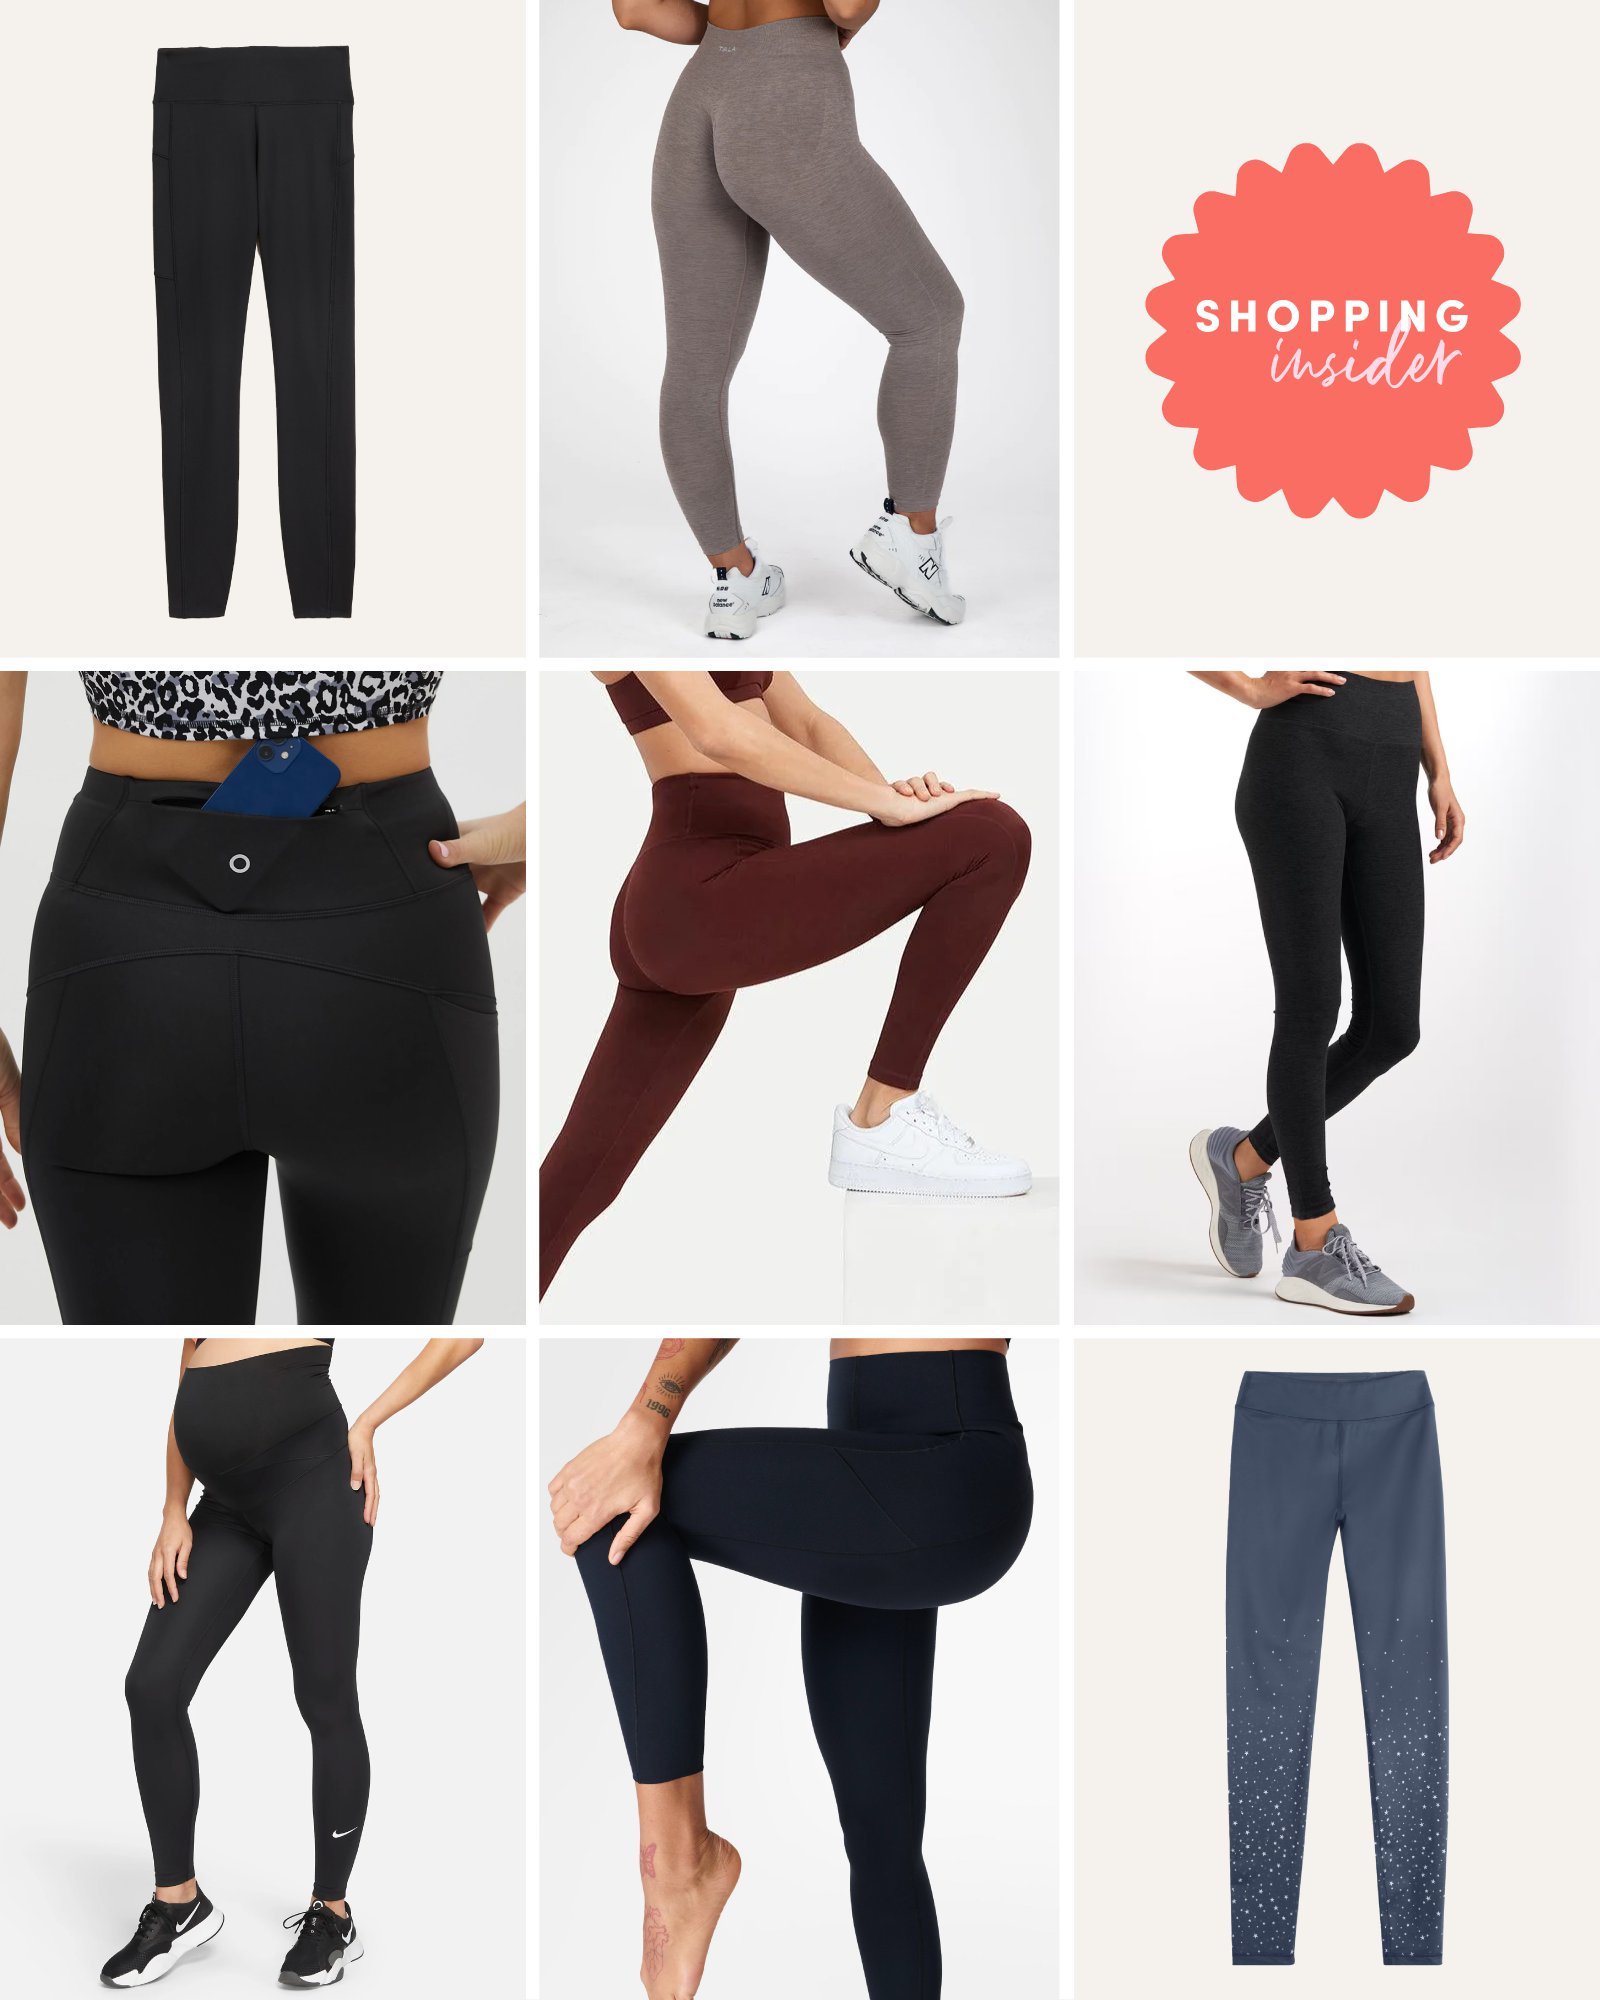 Buy Emberge Women's Gym Wear Tights | Track & Yoga Pants for Women Workout  & Exercise with Mesh Insert & Side Pockets Online at Best Prices in India -  JioMart.